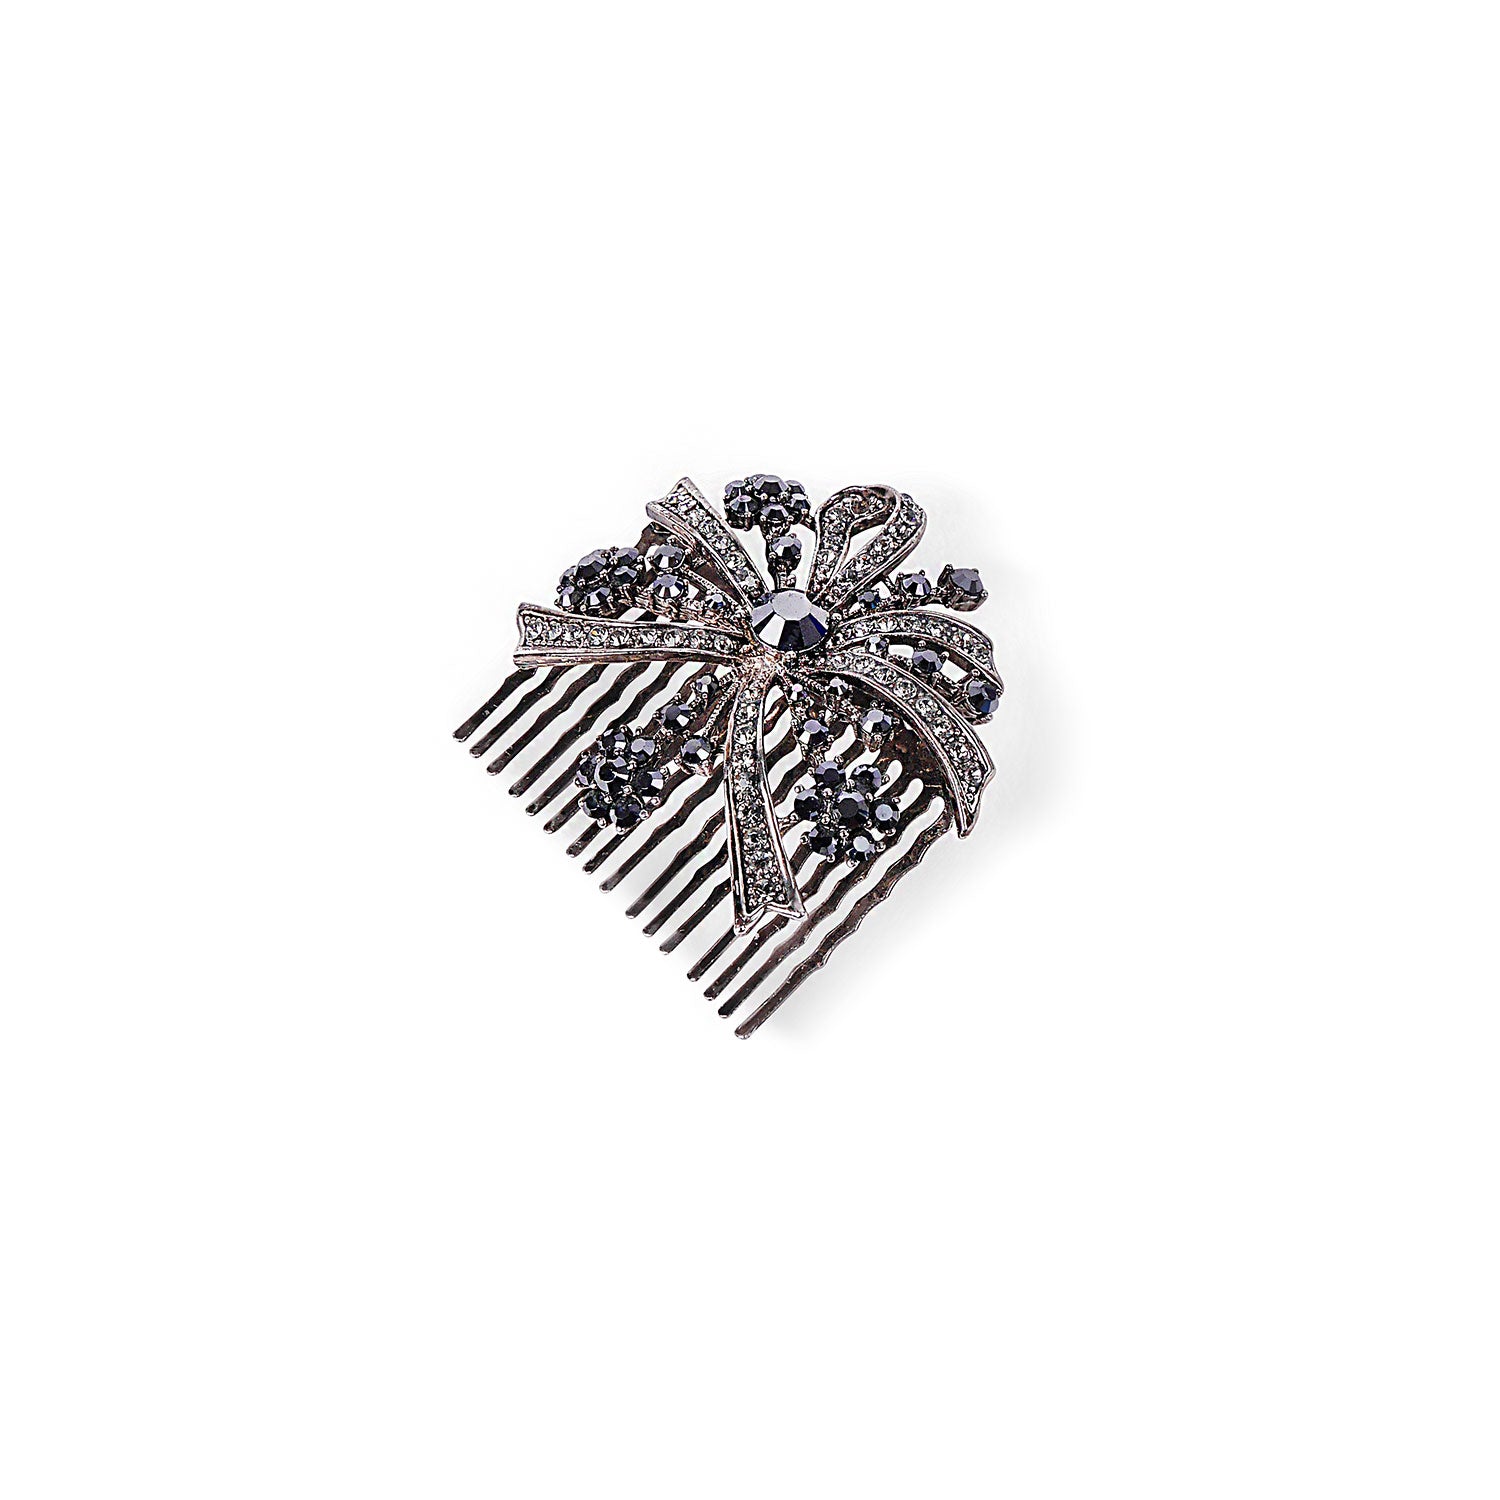 Alora Hair Comb in Black and Grey